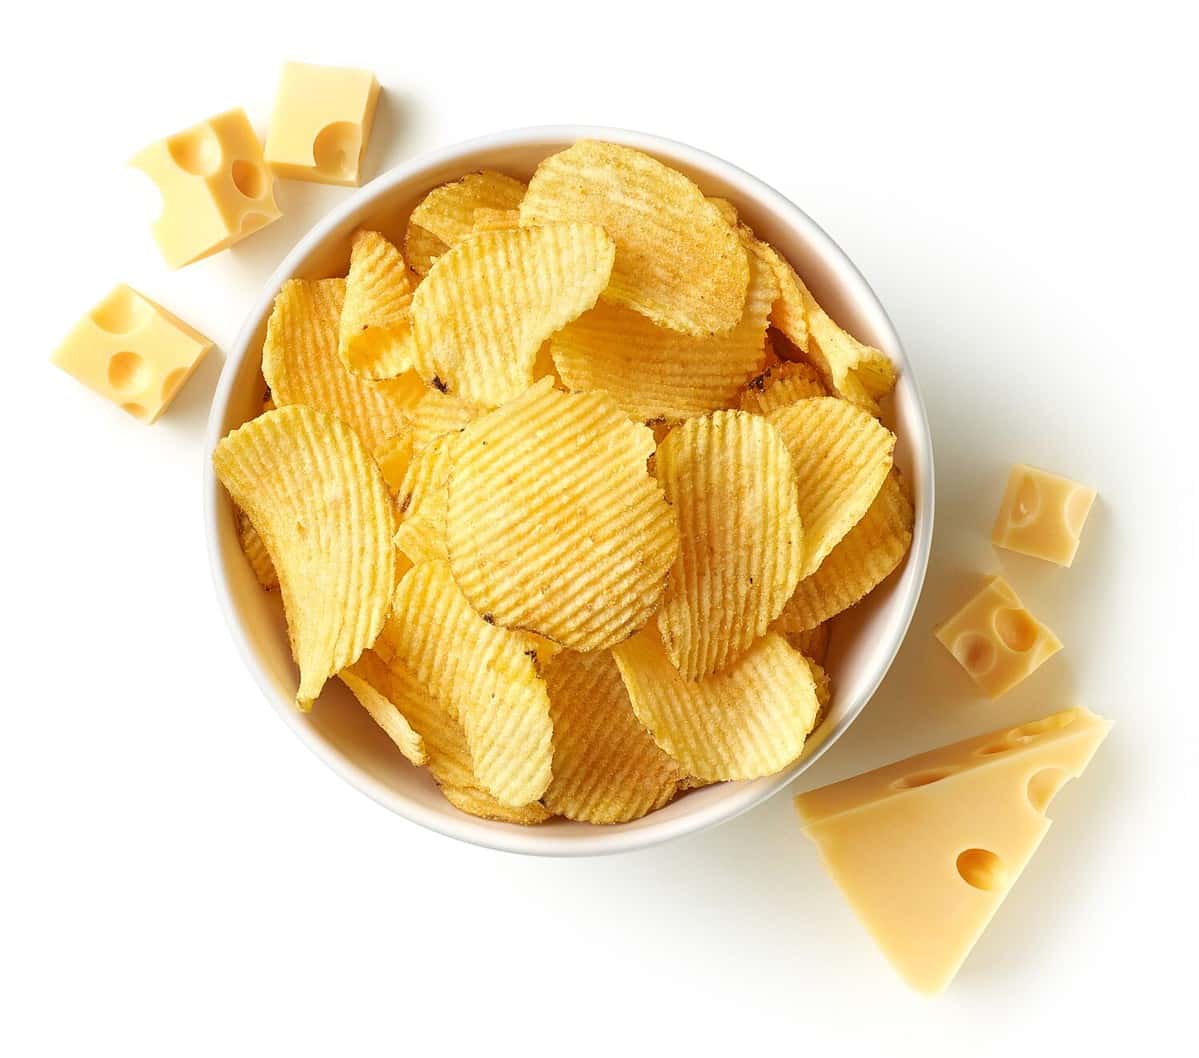 Bowl of crispy wavy potato chips or crisps with cheese flavor isolated on white background, top view